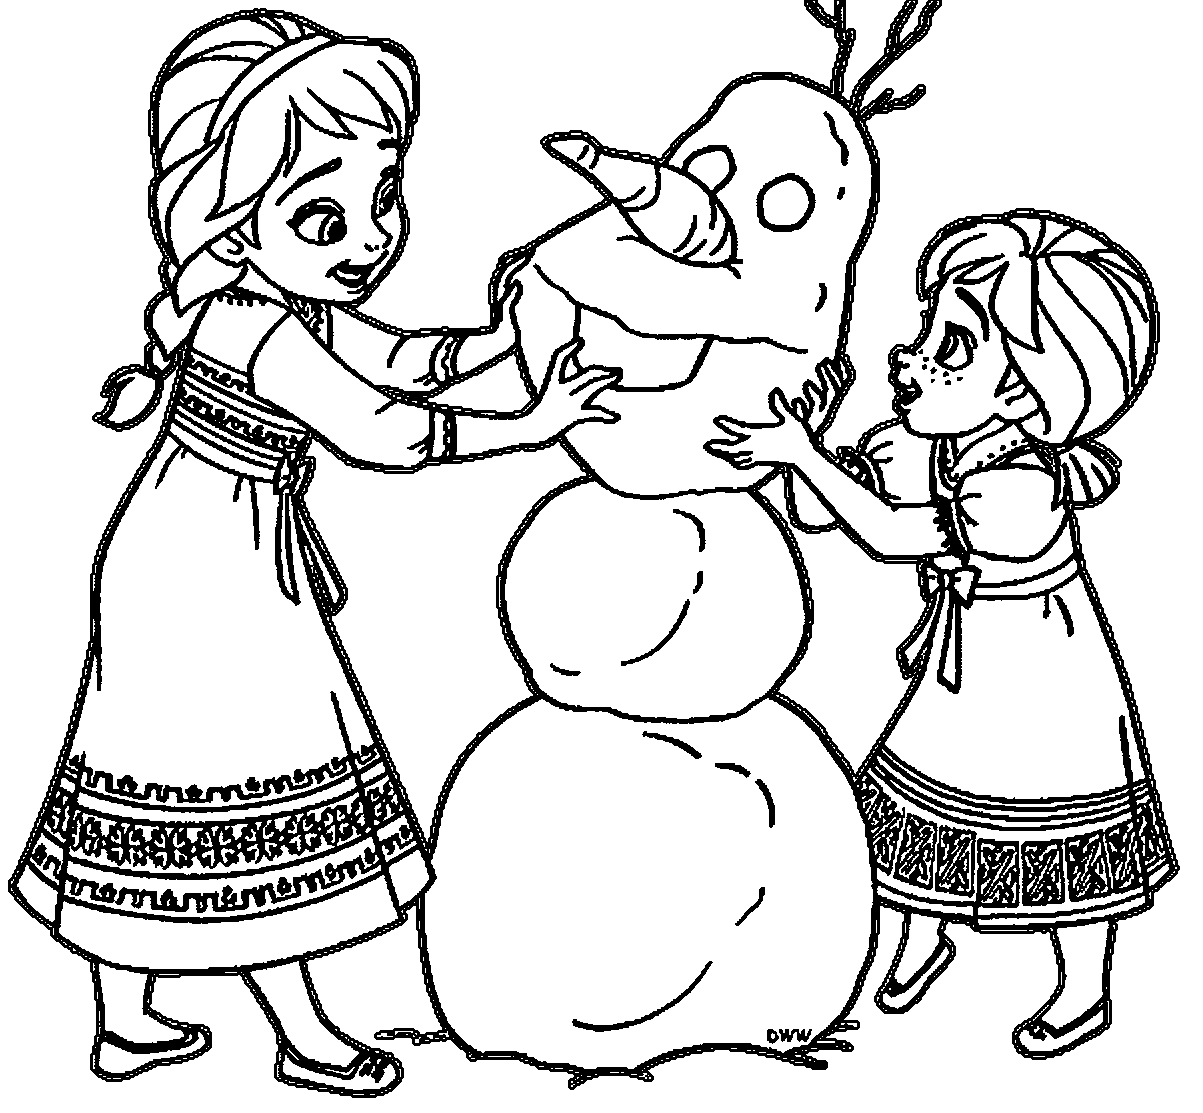 Young Anna Elsa Snow Man Coloring Page WeColoringPage | Wecoloringpage